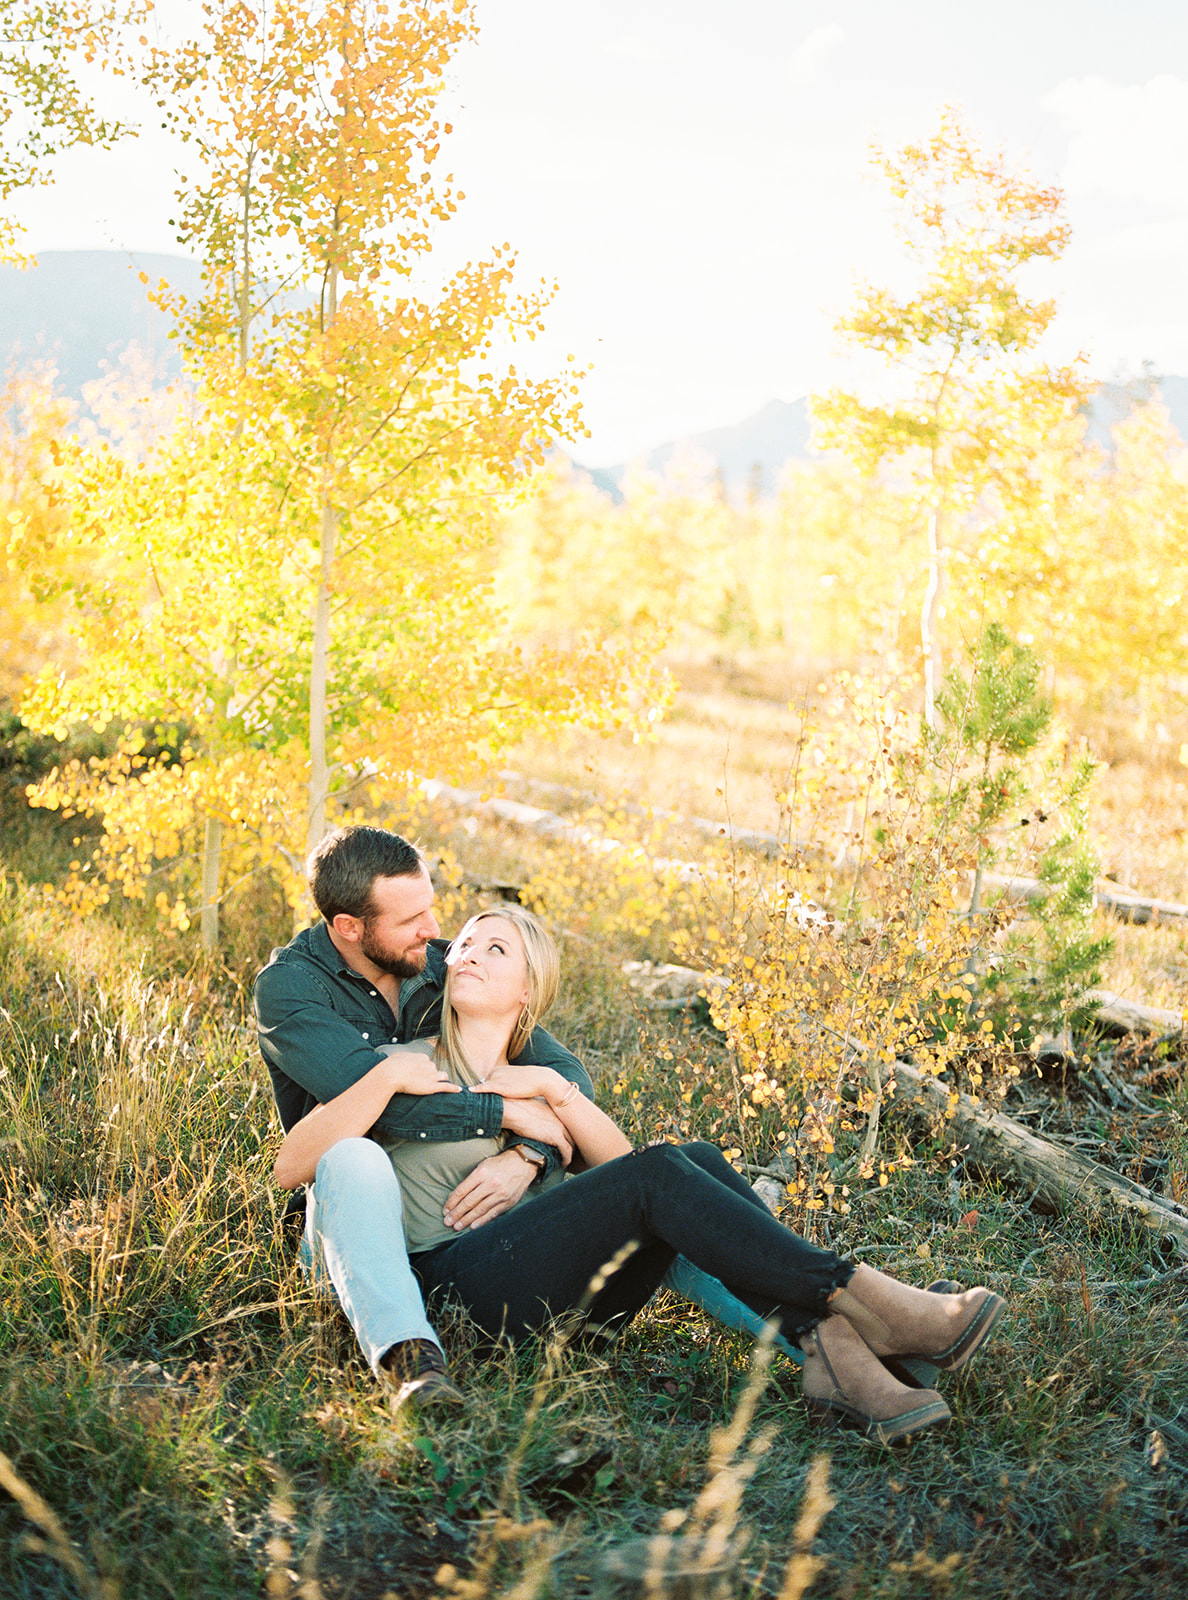 Film engagement photo of couple in fall color mountain setting